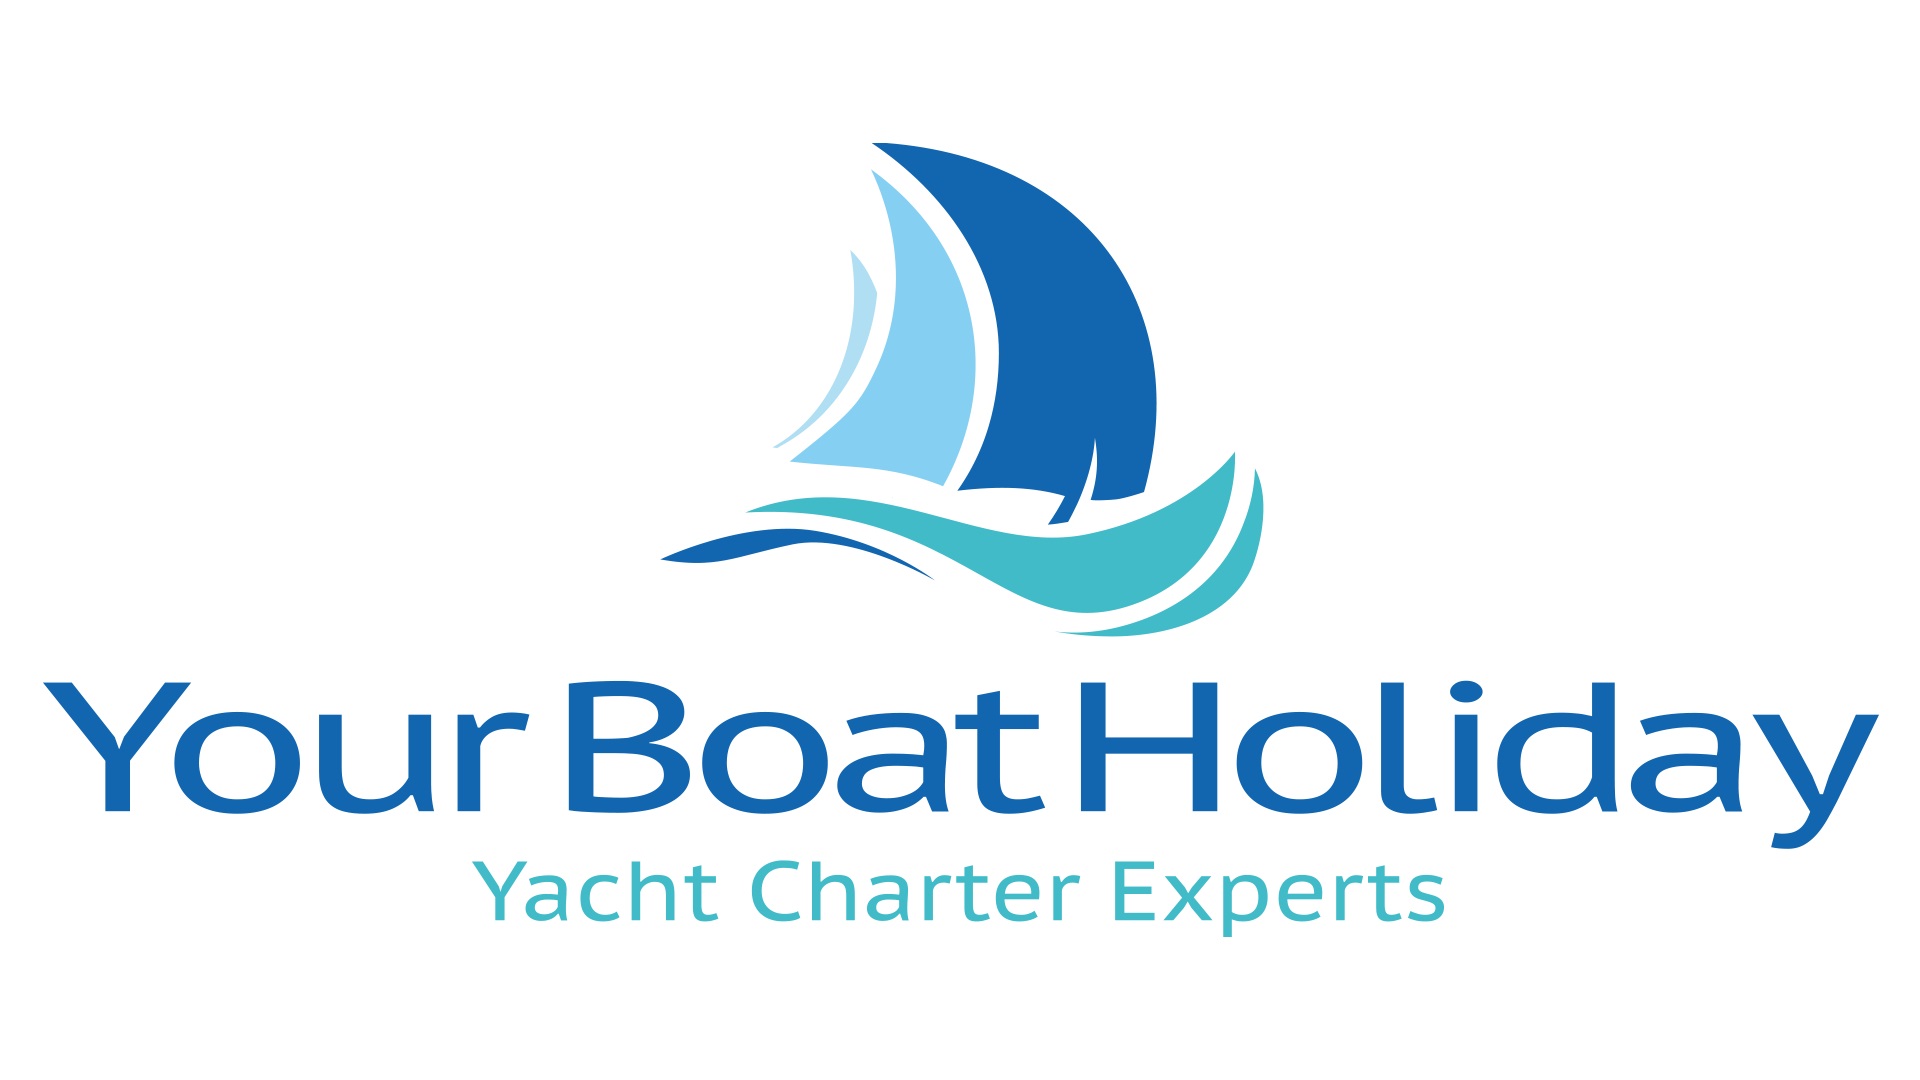 Your Boat Holiday